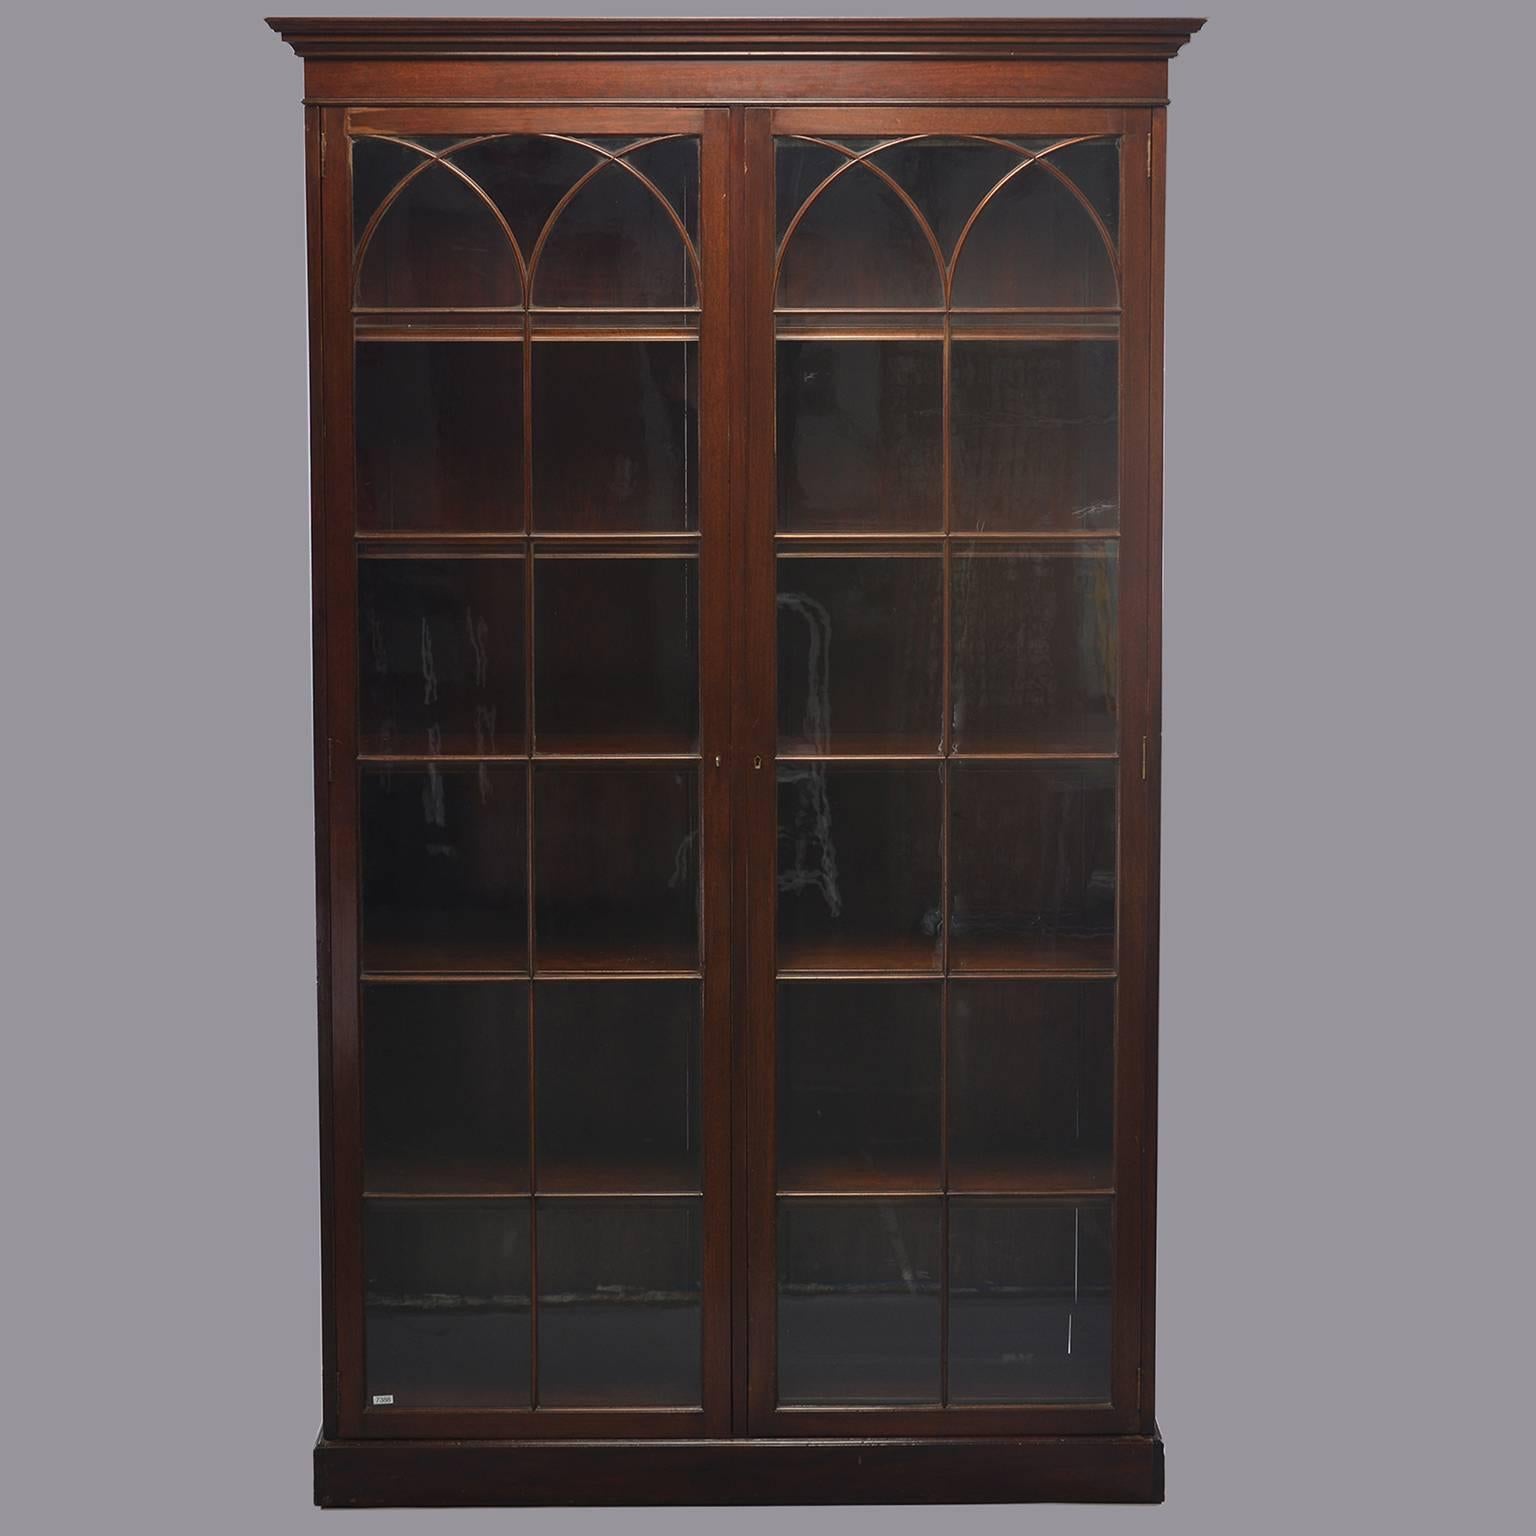 Tall English library cabinet is made of mahogany with decorative pediment, two glass front doors with working skeleton key locks and decorative arched trim, circa 1920s. Five internal fixed shelves.